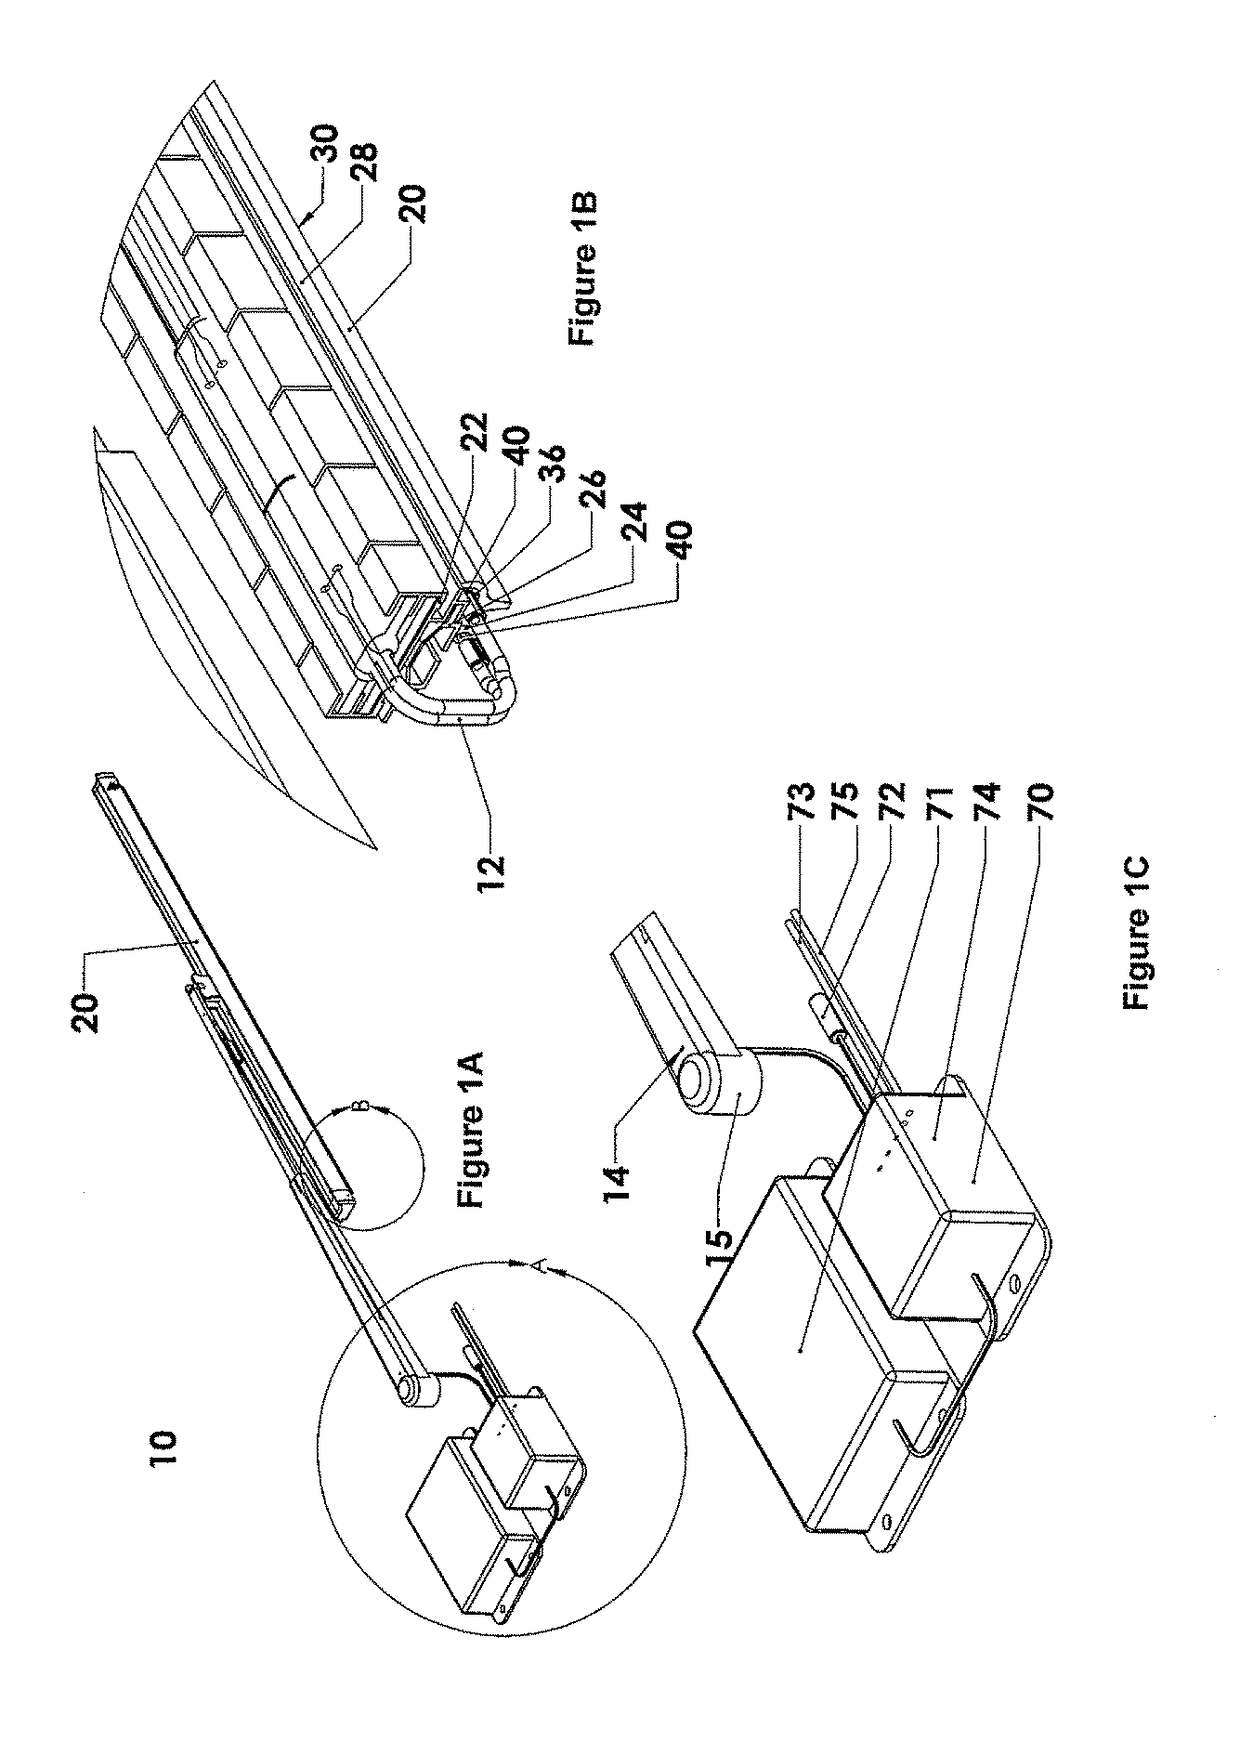 Heated windshield wiper system for vehicle